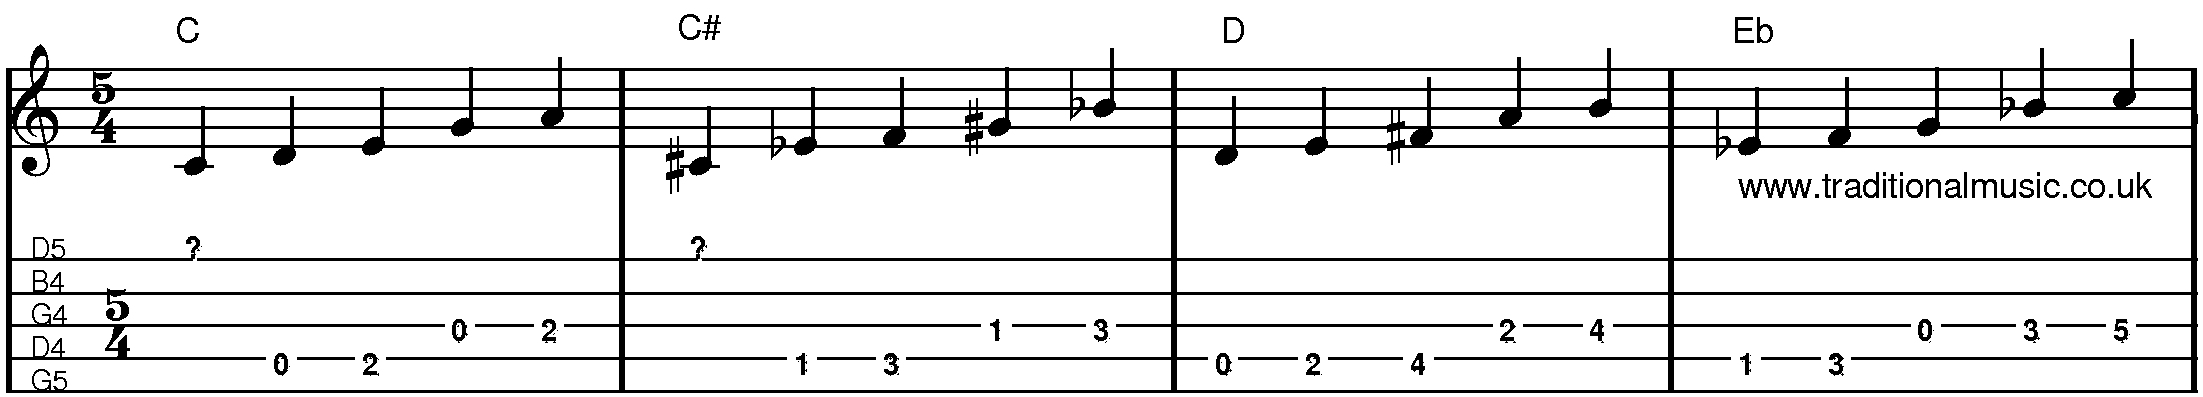 A Chords Major Pentatonic Scales for Banjo C to Eb